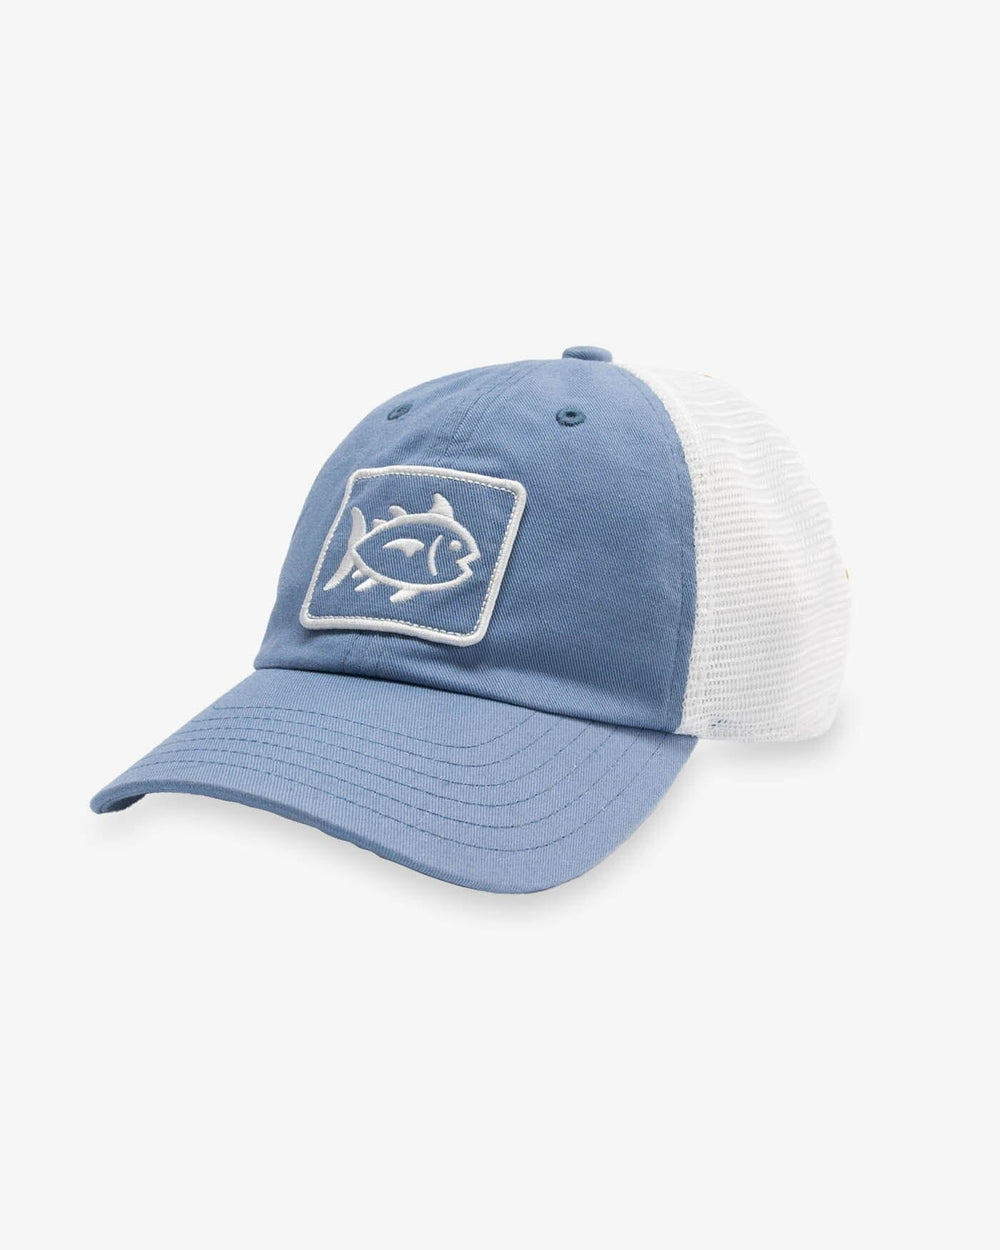 The front view of the Southern Tide Kids Skipjack Fly Patch Sun Farer Trucker by Southern Tide - Subdued Blue